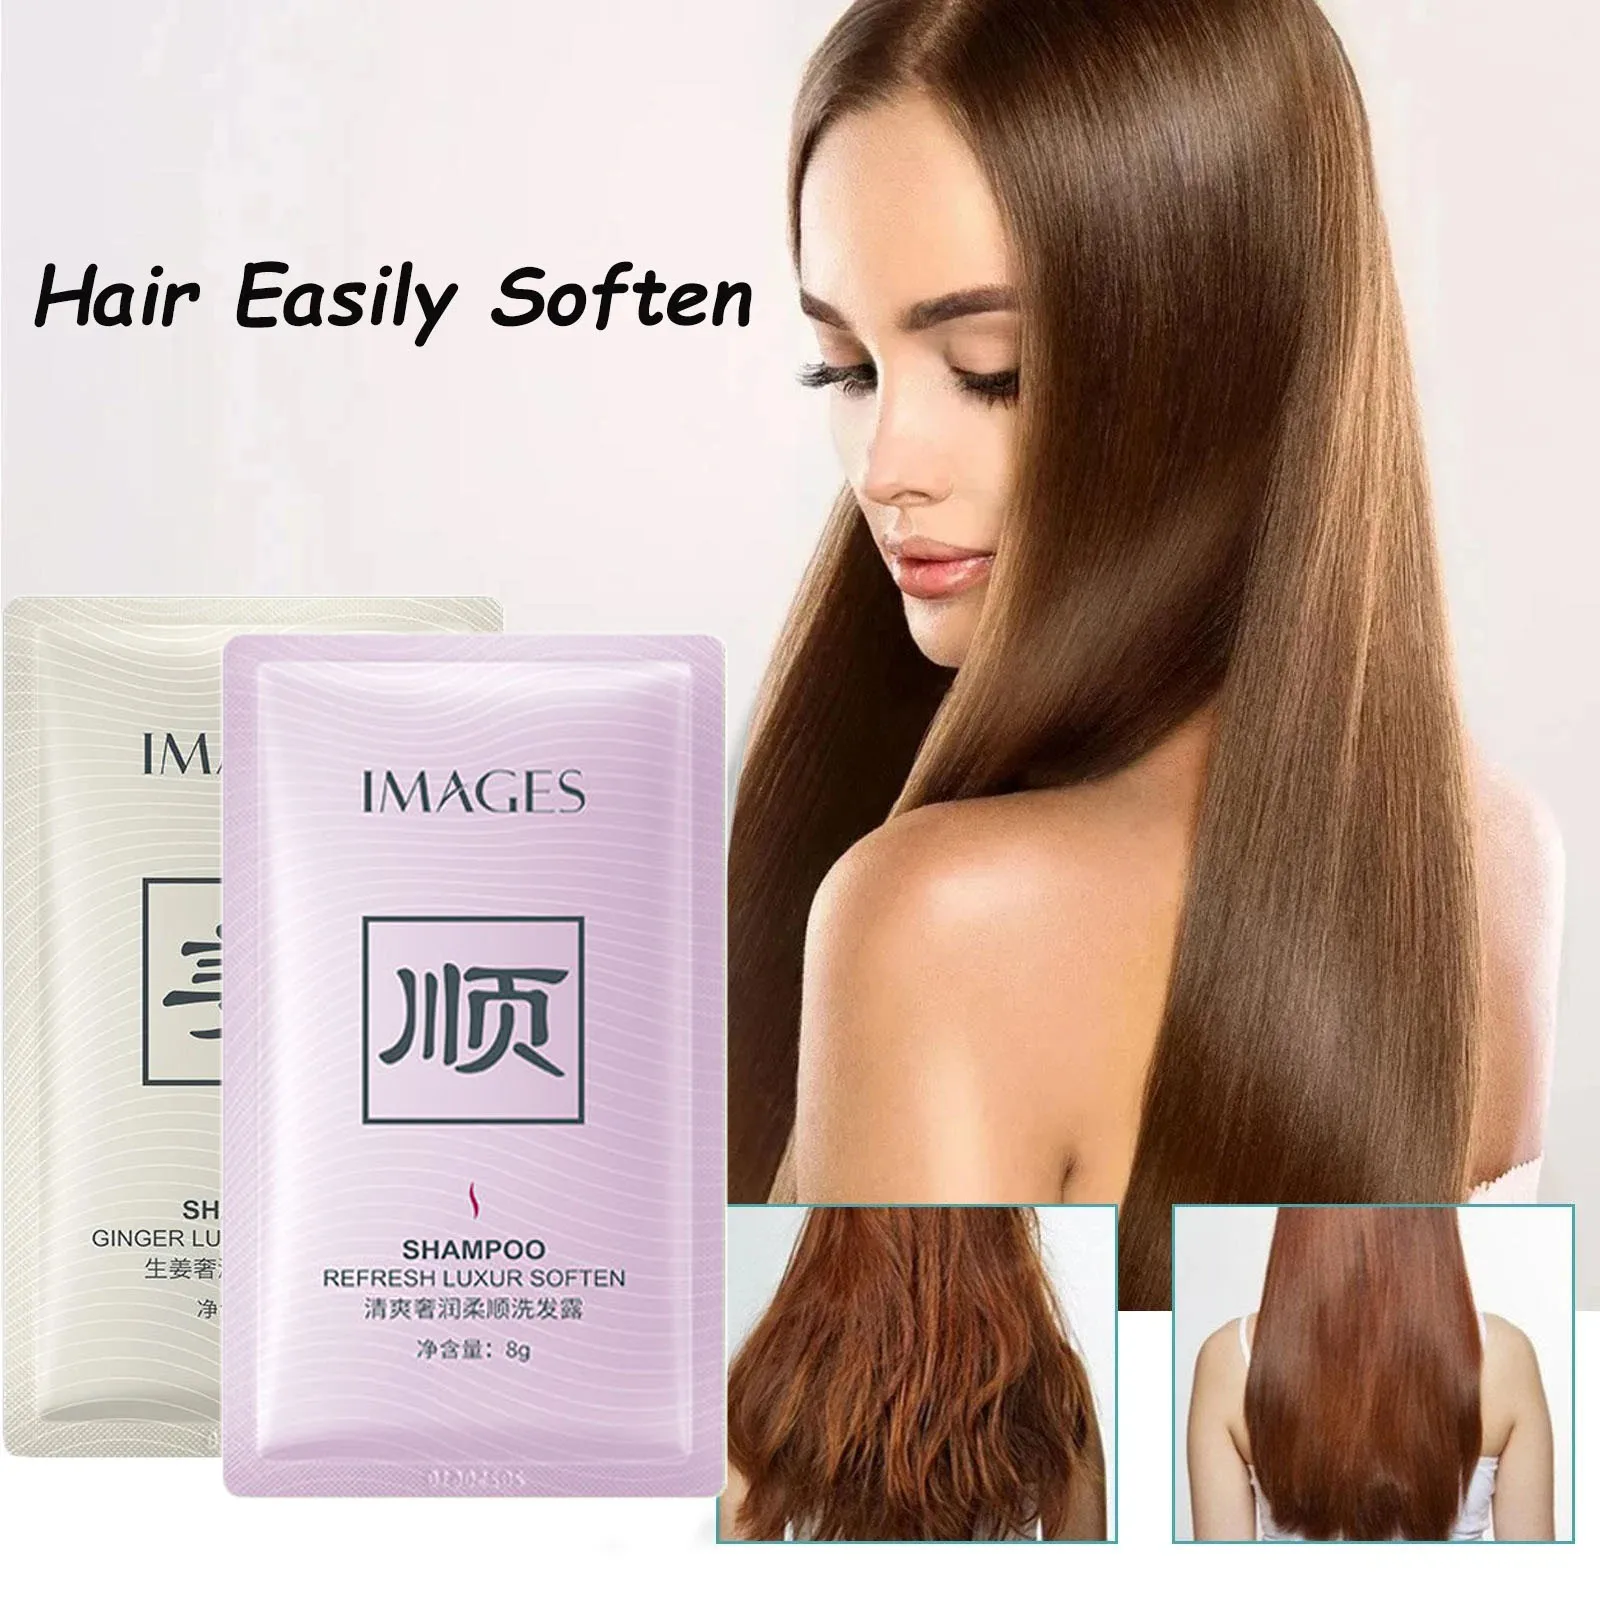 10PCS Hair Straightening Cream Hair Smoothing Hair Treatment Softener  Nutrition Moisture Does Not Hurt Hair Easily Soften 5 10pcs wrinkle patches eye mask smoothing silicone nutrition removal wrinkle face care anti aging lift sticker instant beauty